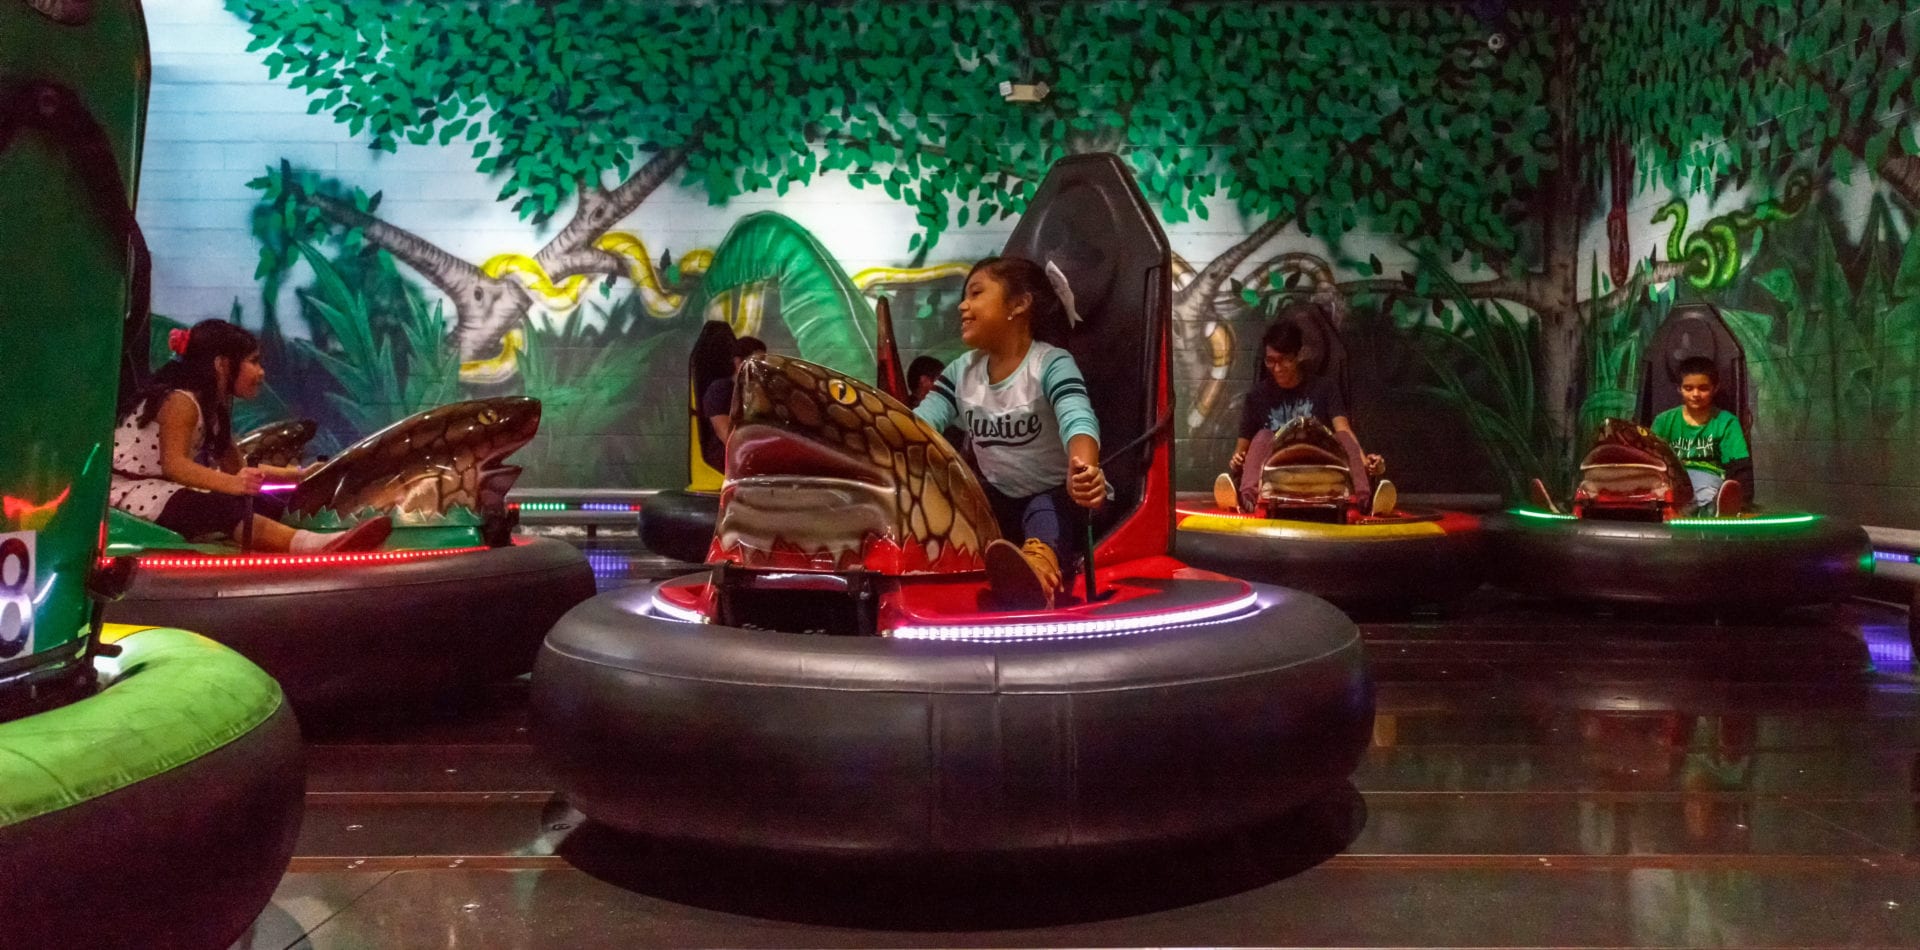 Kid smiling playing in a bumper car